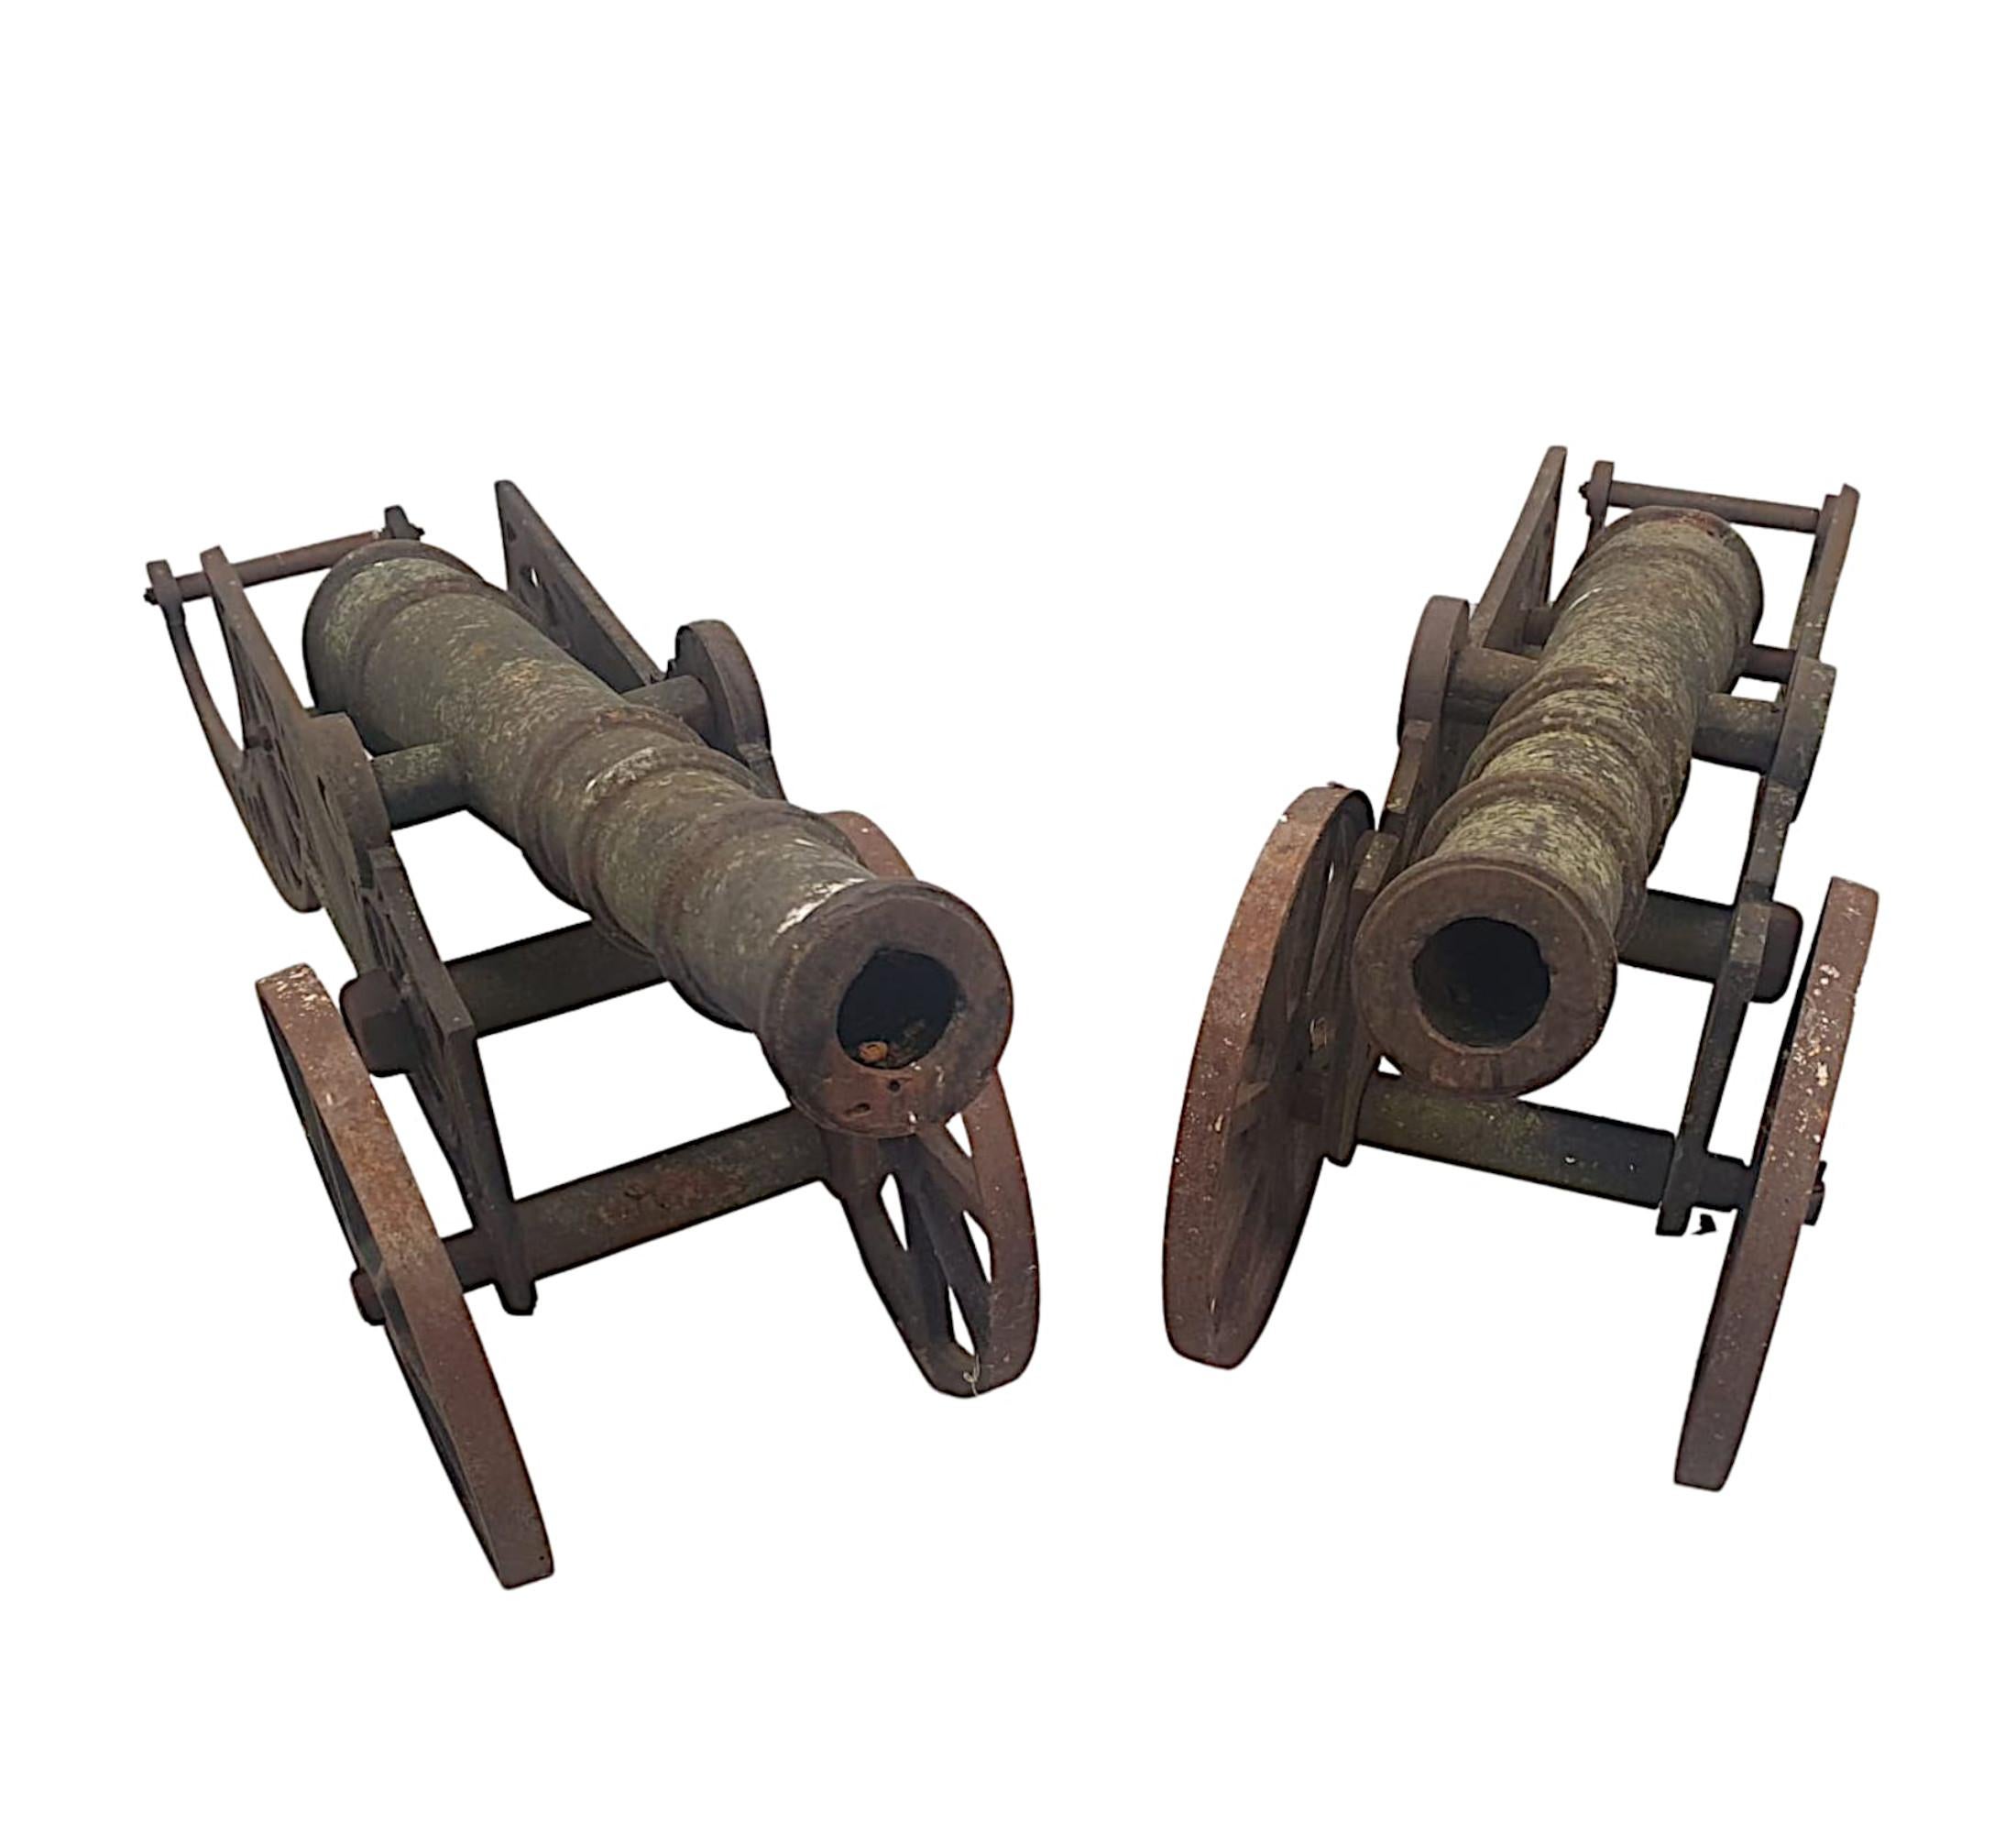 A Fabulous Pair of Large Mid 20th Century Cast Iron Garden Cannons 1